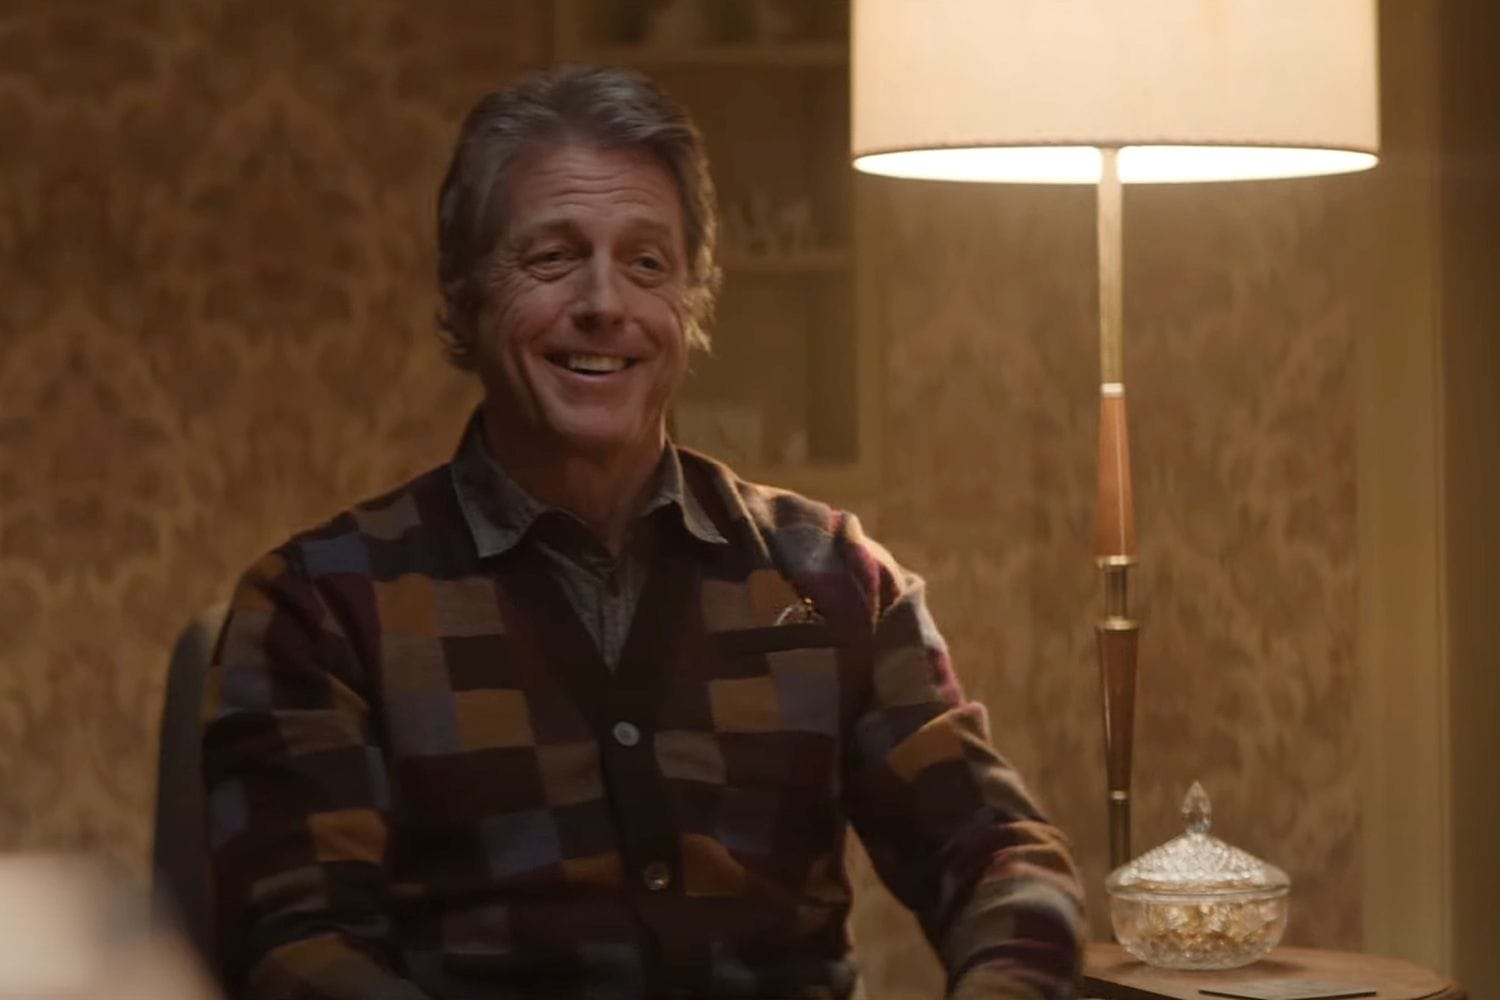 Heretic Horror Movie Starring Hugh Grant Gets First Trailer and Poster Reveal